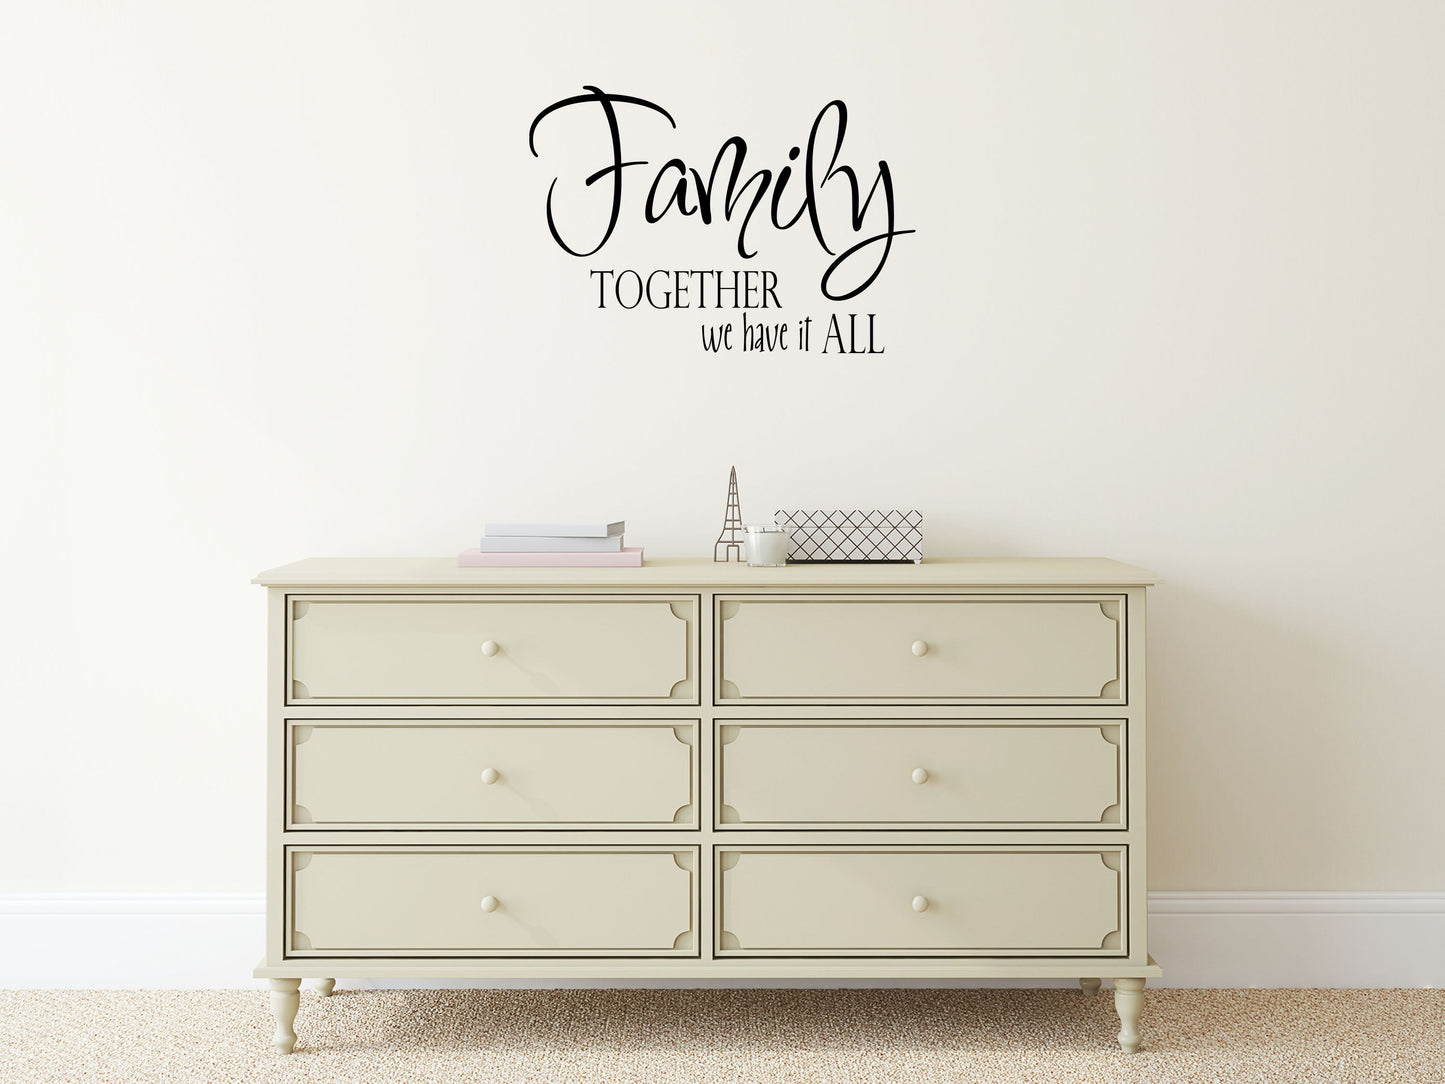 Family Together - Inspirational Wall Decals Vinyl Wall Decal Inspirational Wall Signs 